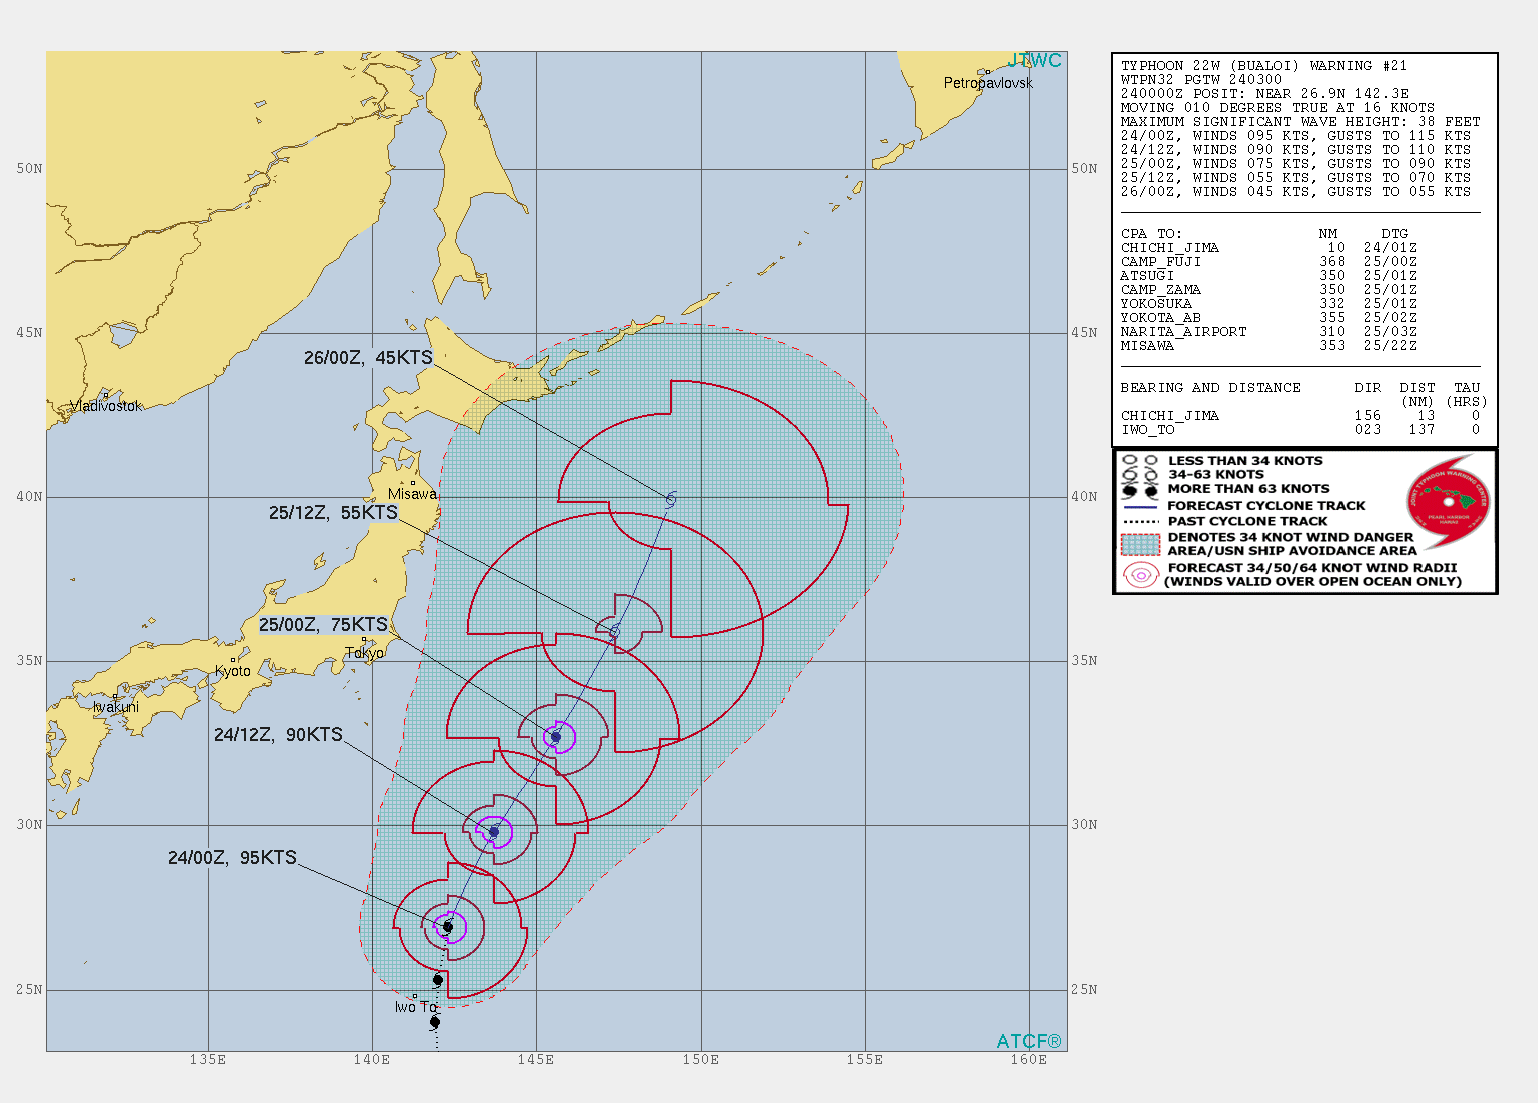 TY 22W: INTENSITY FORECAST TO FALL BELOW TYPHOON LEVEL AFTER 24H